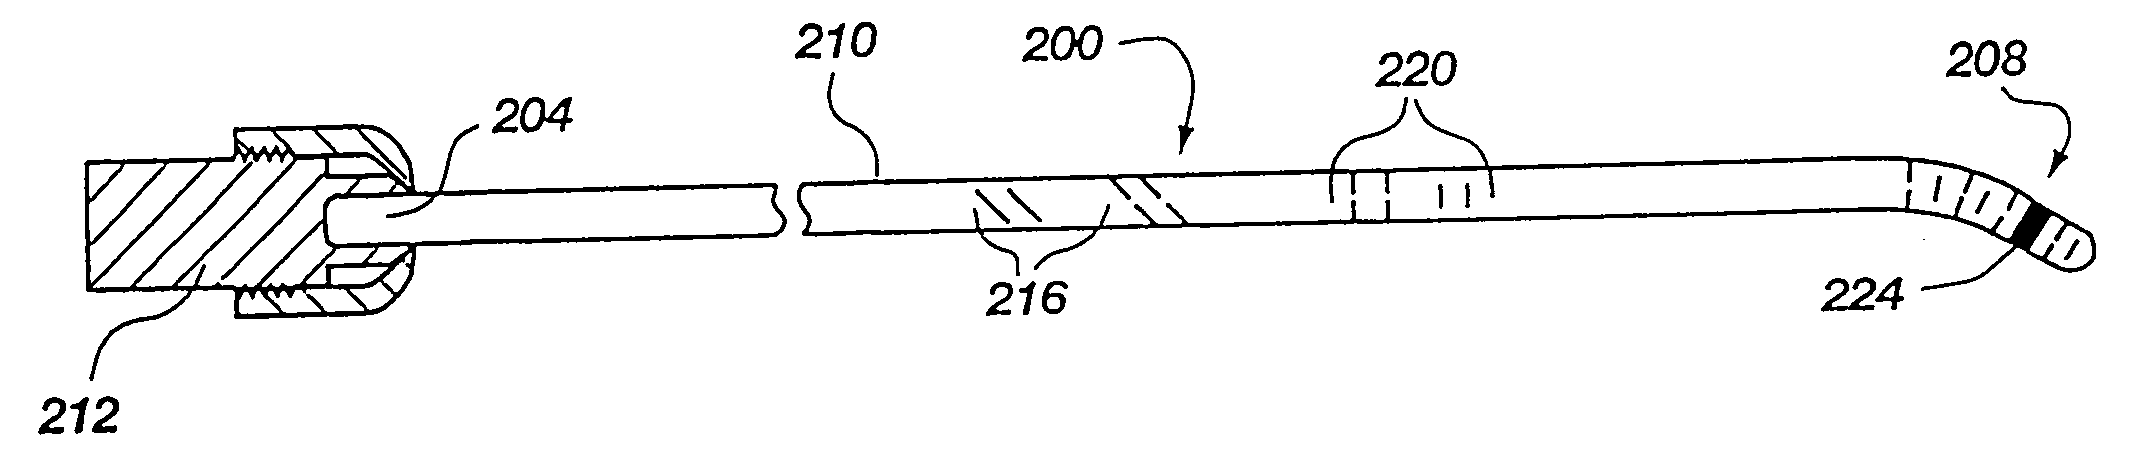 Medical device with collapse-resistant liner and mehtod of making same